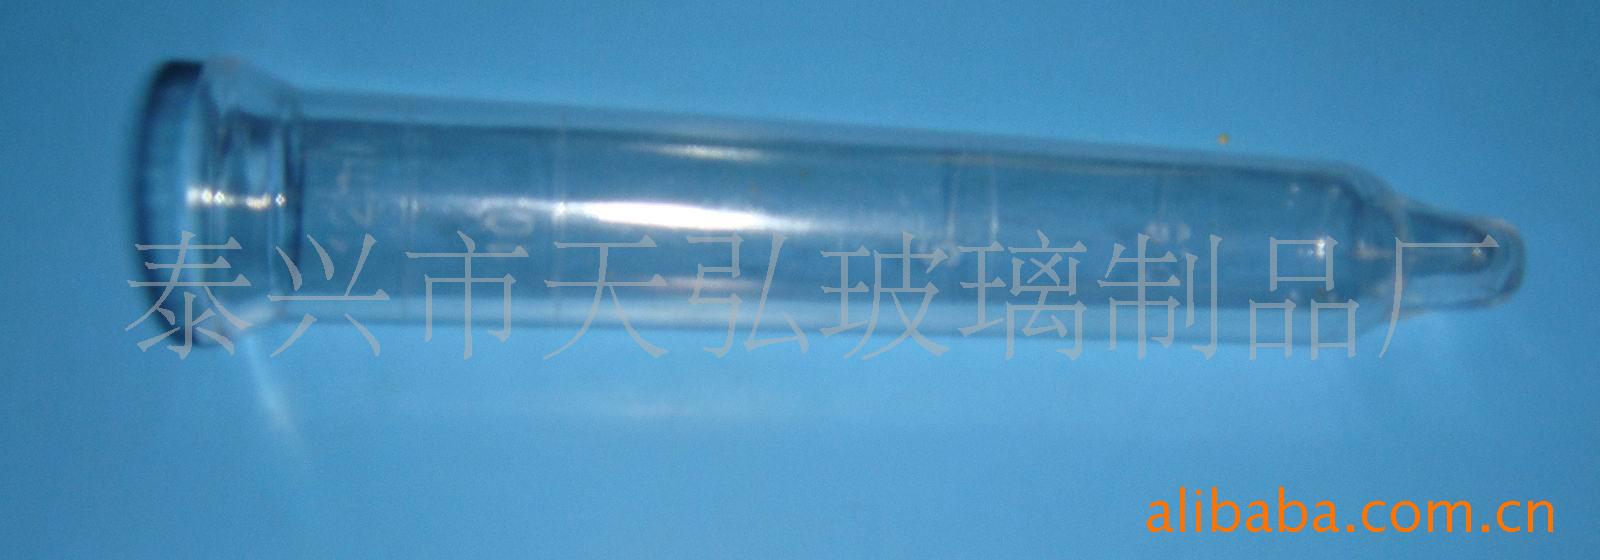 supply medical Urinary sediment test tube 15ml Flaps ps Hard tape scale 2000 branch/Large box discount